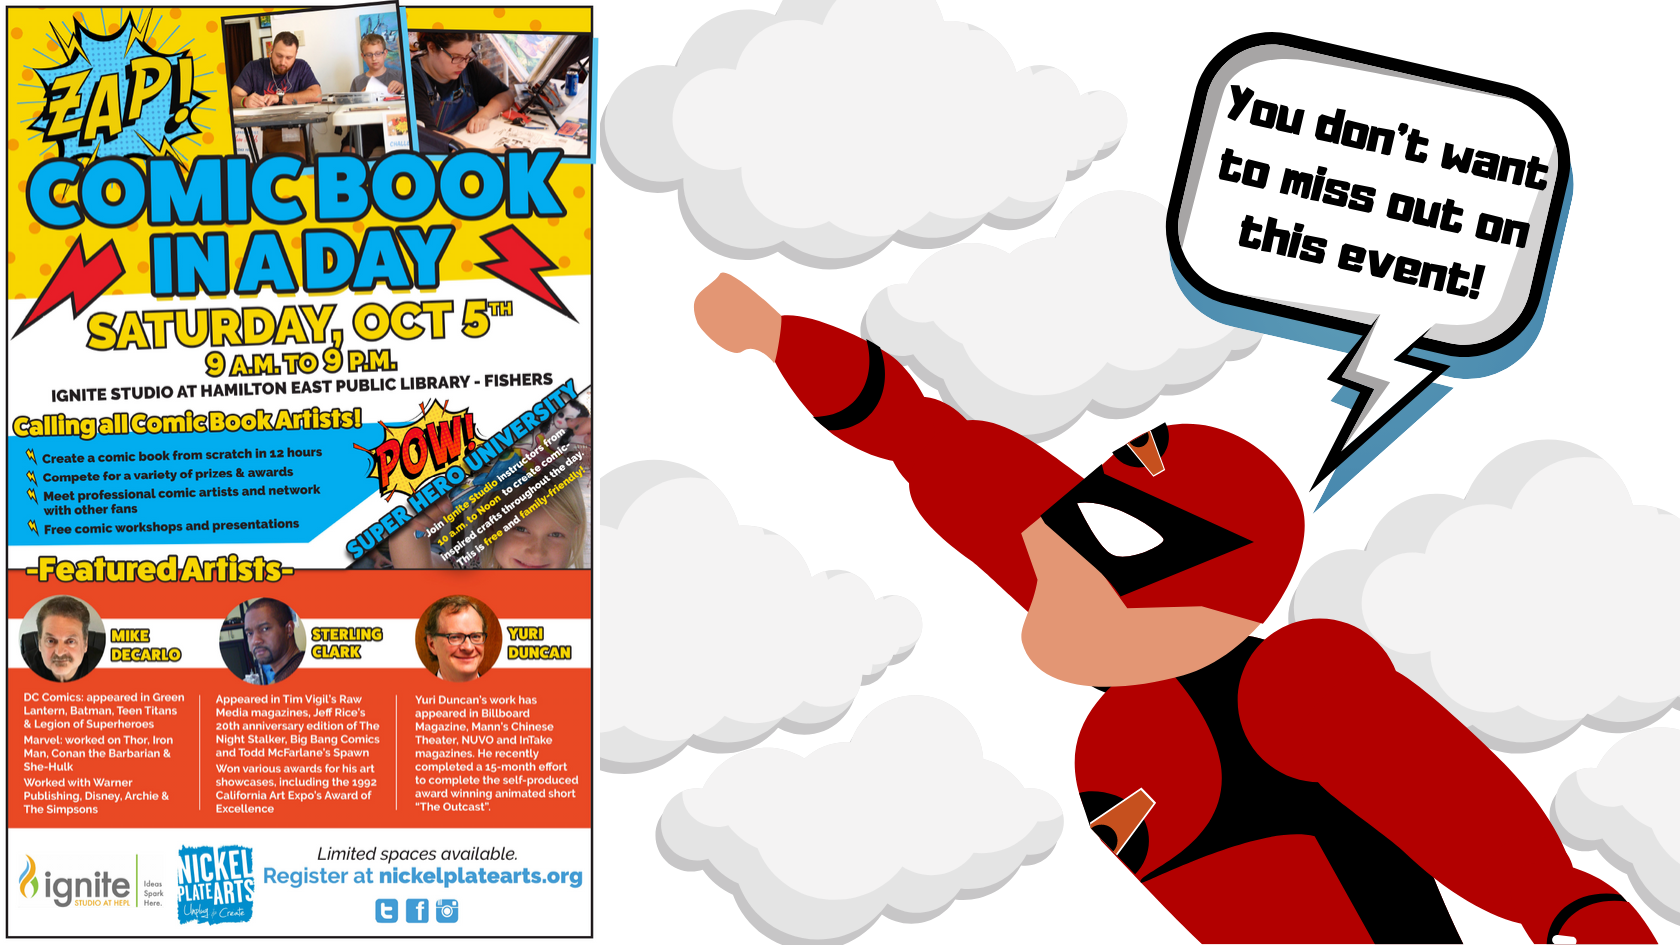 Join Us in Ignite for Comic Book in a Day